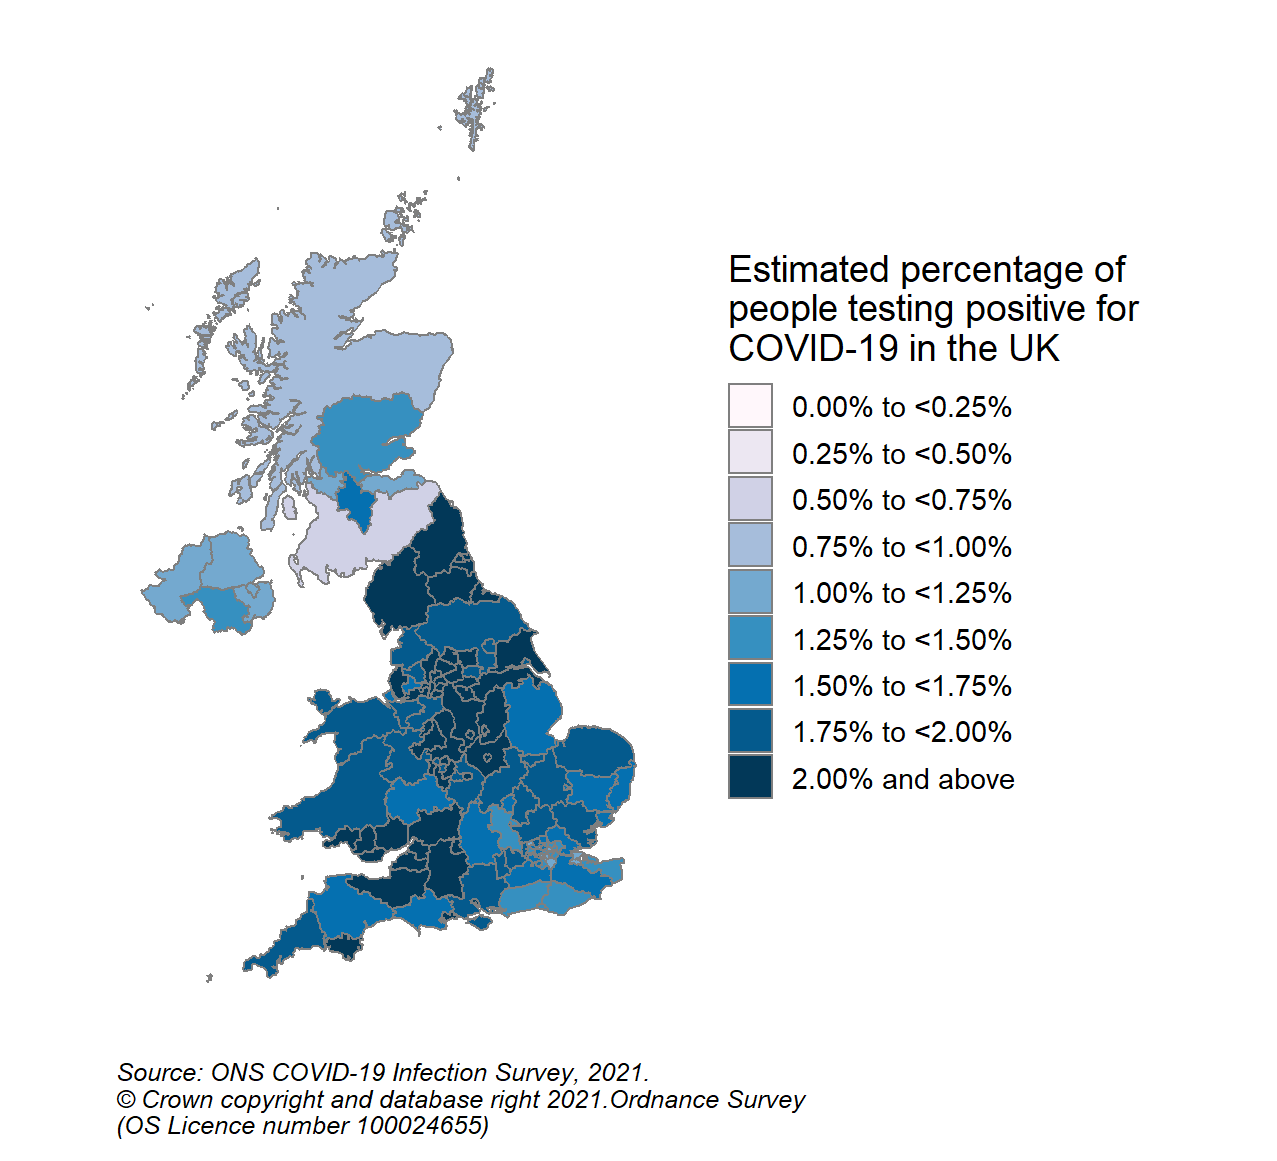 This colour coded map of the UK shows the modelled estimates of the percentage of the private residential population testing positive for COVID-19, by COVID-19 Infection Survey sub-regions. In Scotland, these sub-regions are comprised of Health Boards. The regions are: 123 - NHS Grampian, NHS Highland, NHS Orkney, NHS Shetland and NHS Western Isles, 124 - NHS Fife, NHS Forth Valley and NHS Tayside, 125 - NHS Greater Glasgow & Clyde, 126 - NHS Lothian, 127 - NHS Lanarkshire, 128 - NHS Ayrshire & Arran, NHS Borders and NHS Dumfries & Galloway.  The sub-region with the highest modelled estimate for the percentage of people testing positive was CIS Region 127 (NHS Lanarkshire) at 1.56% (95% credible interval: 1.18% to 2.01%).  The region with the lowest modelled estimate was Region 128 (NHS Ayrshire & Arran, NHS Borders and NHS Dumfries & Galloway), at 0.74% (95% credible interval: 0.51% to 1.03%).